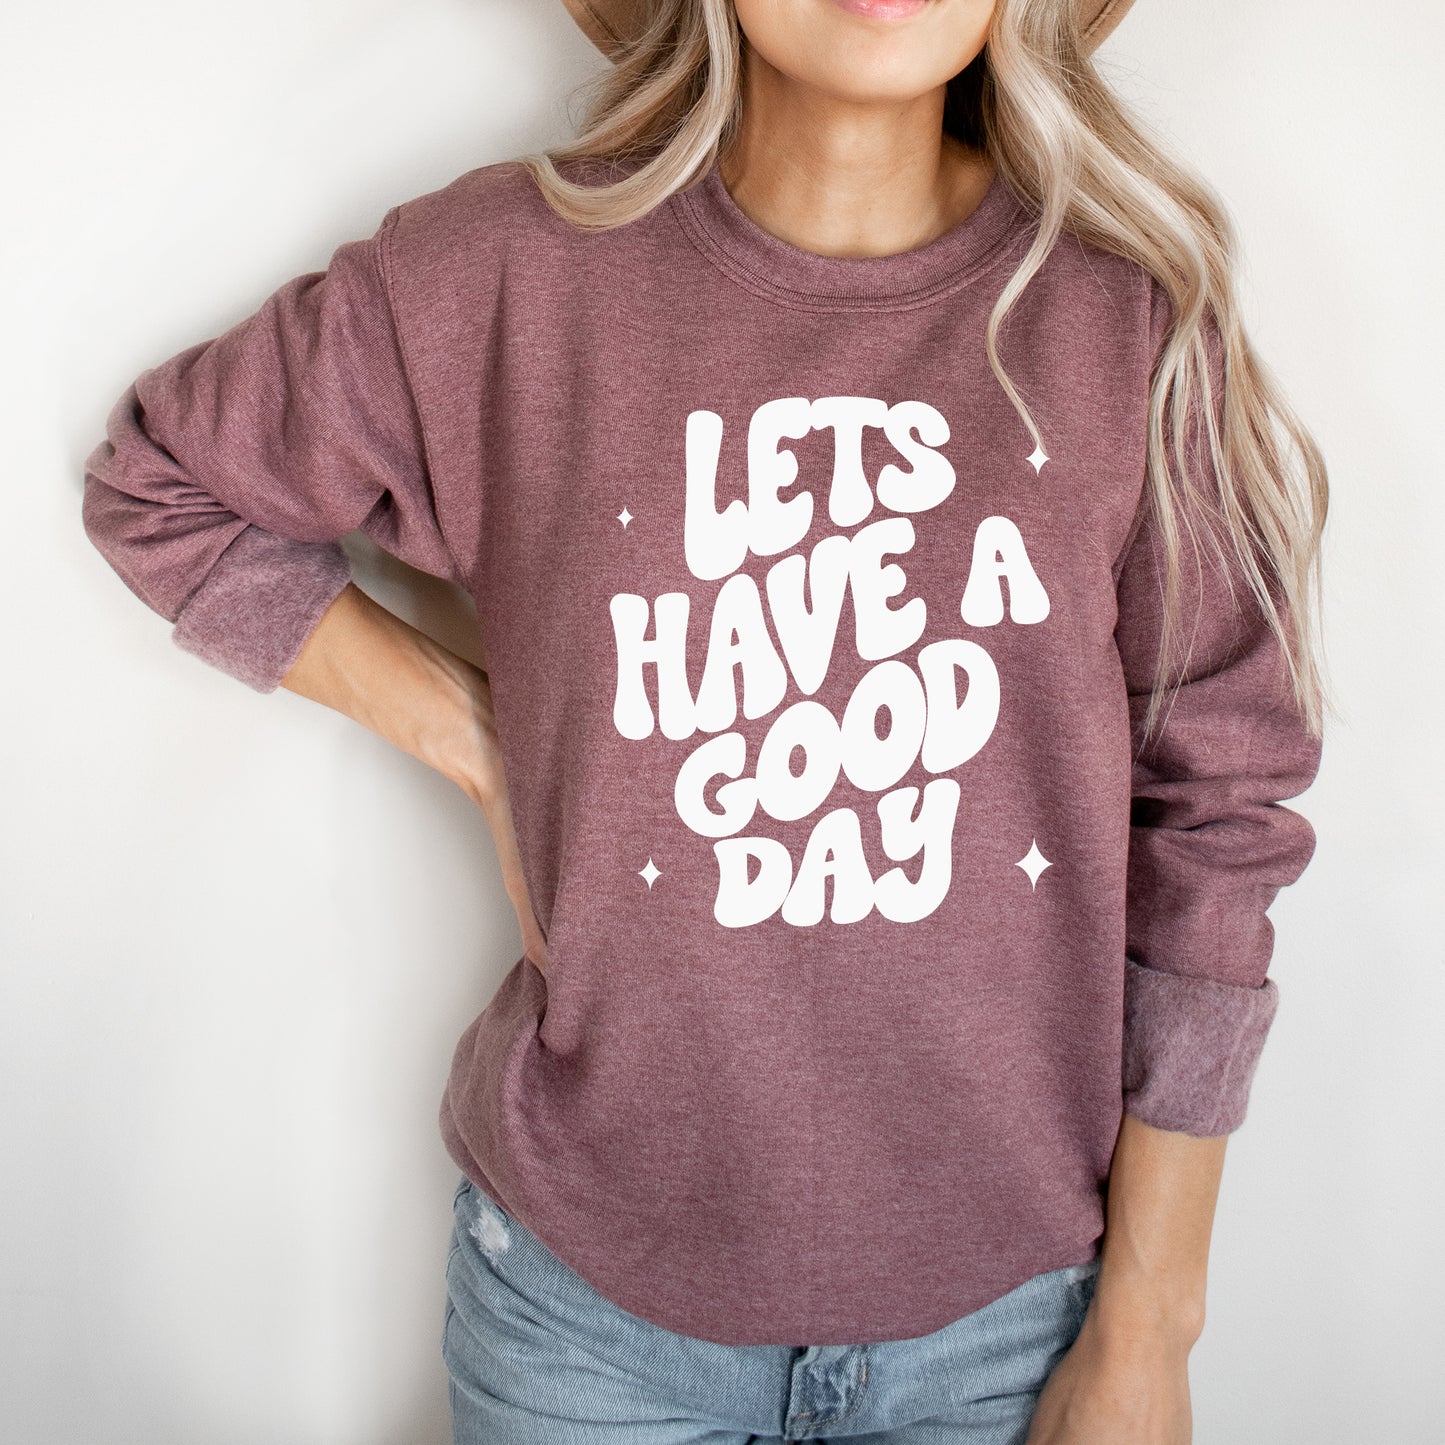 Let's Have A Good Day | Sweatshirt